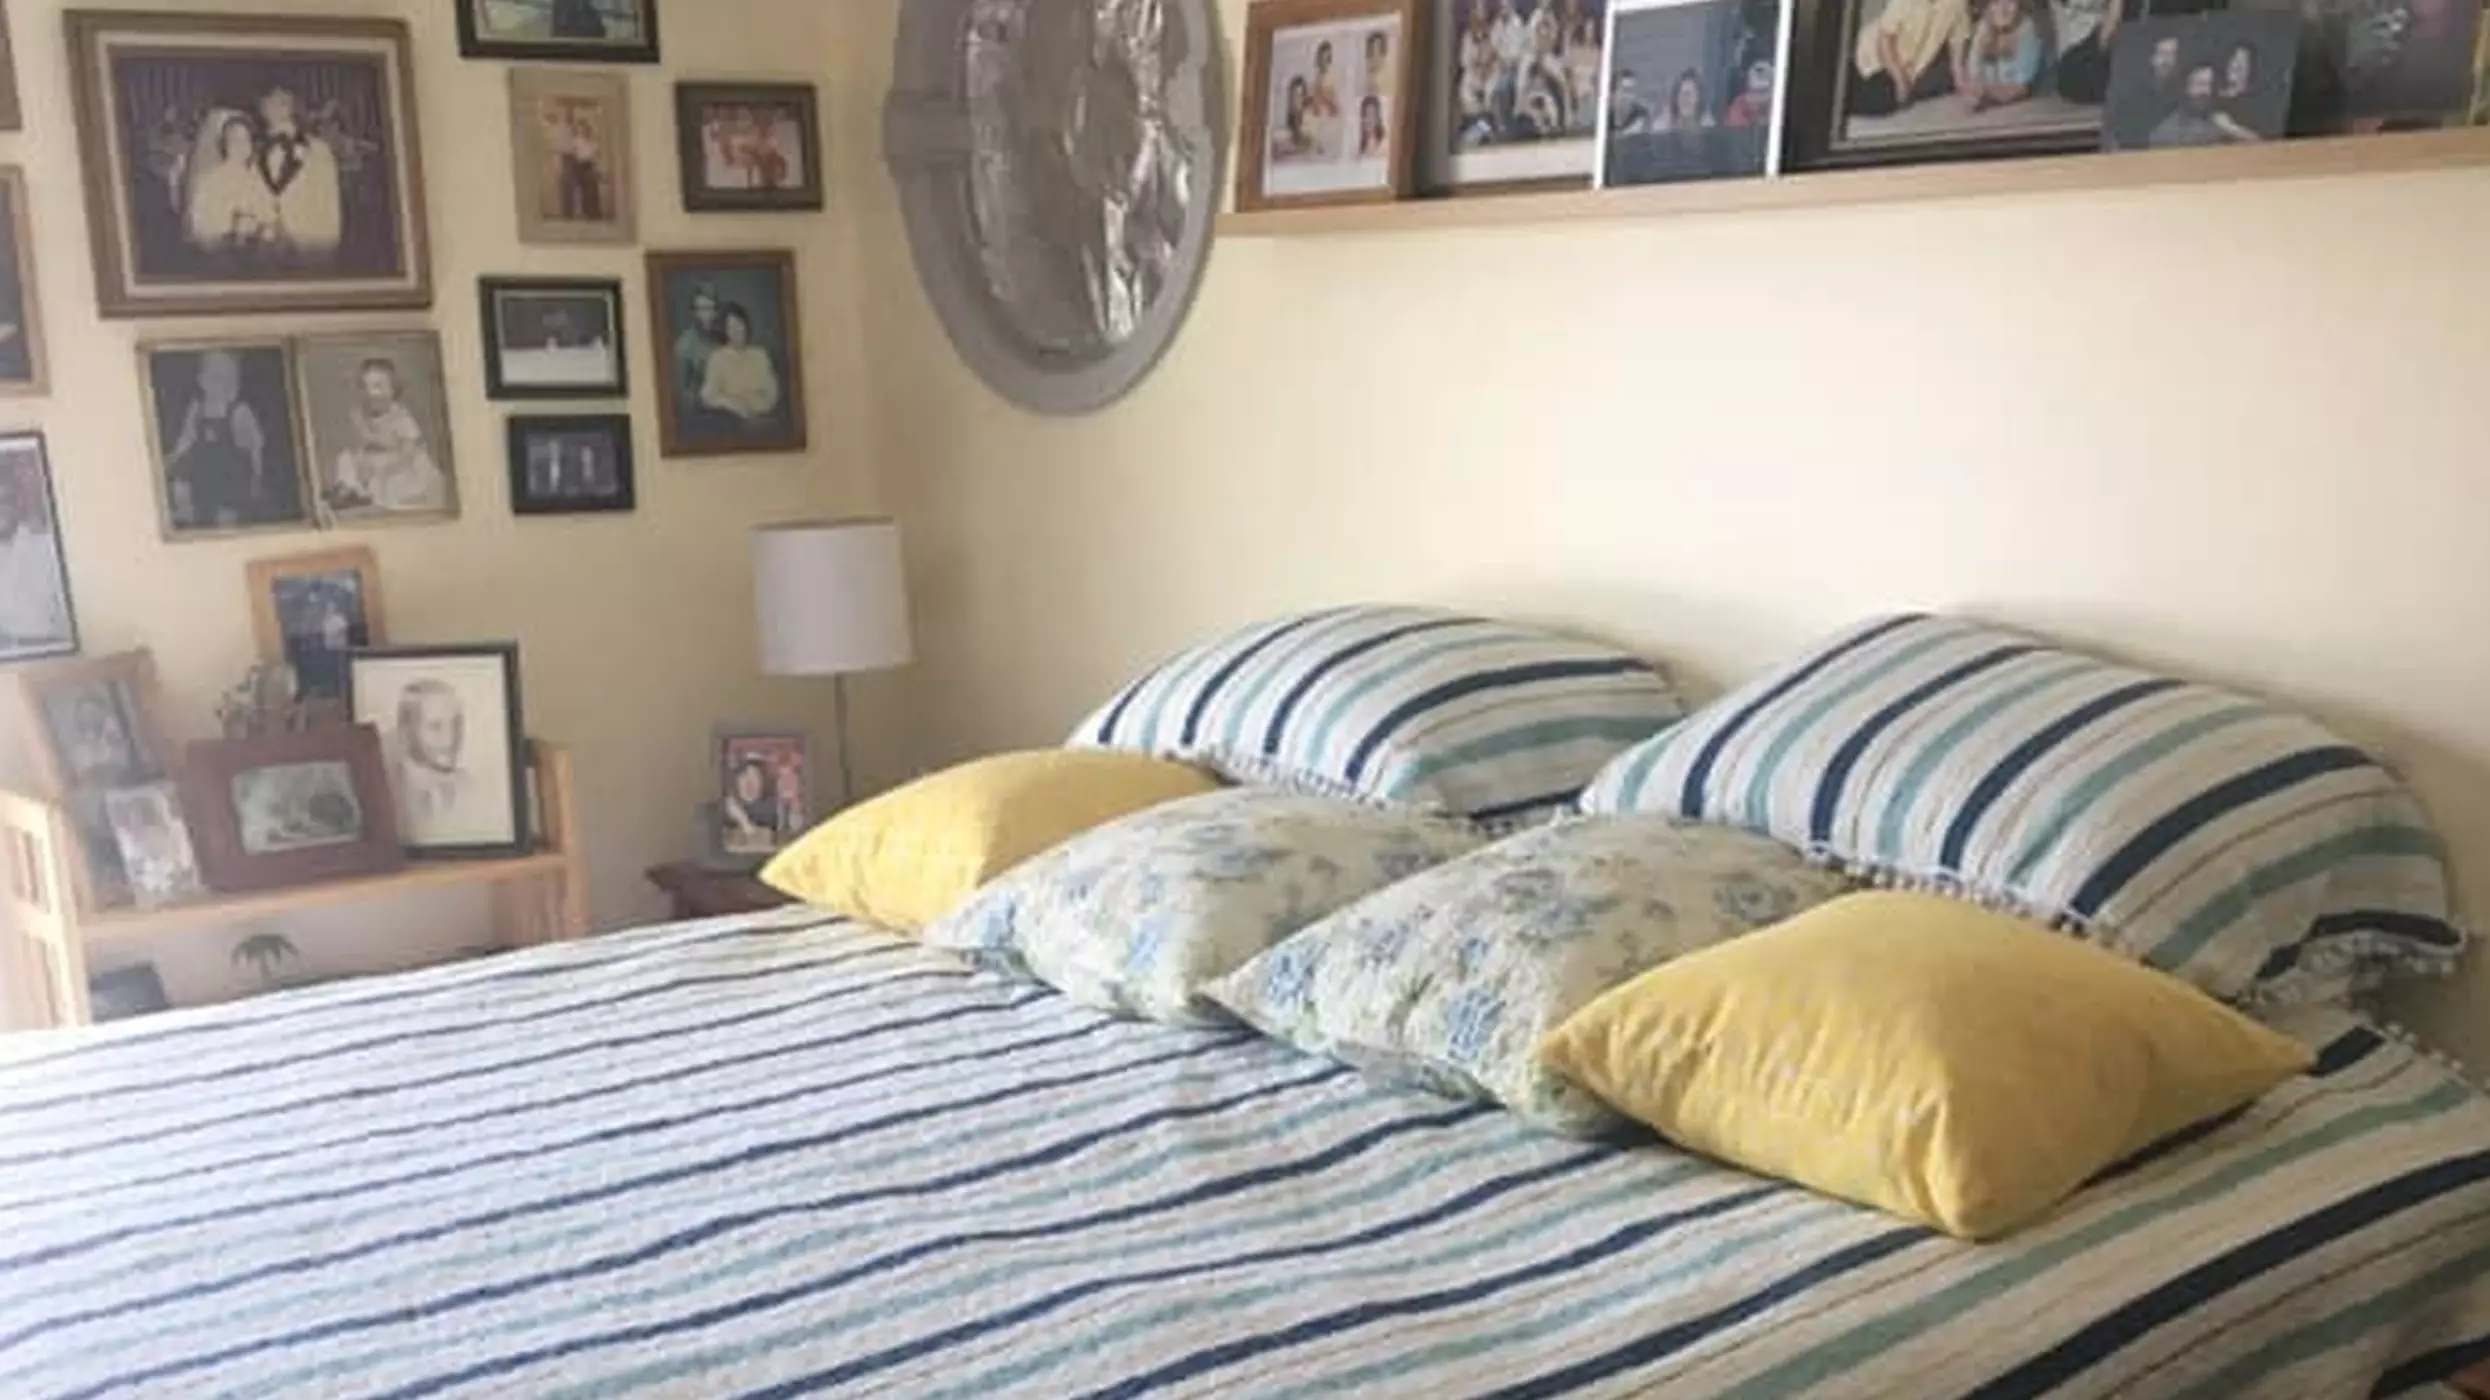 Woman Left Creasing By Husband's Attempt To 'Make The Bed'